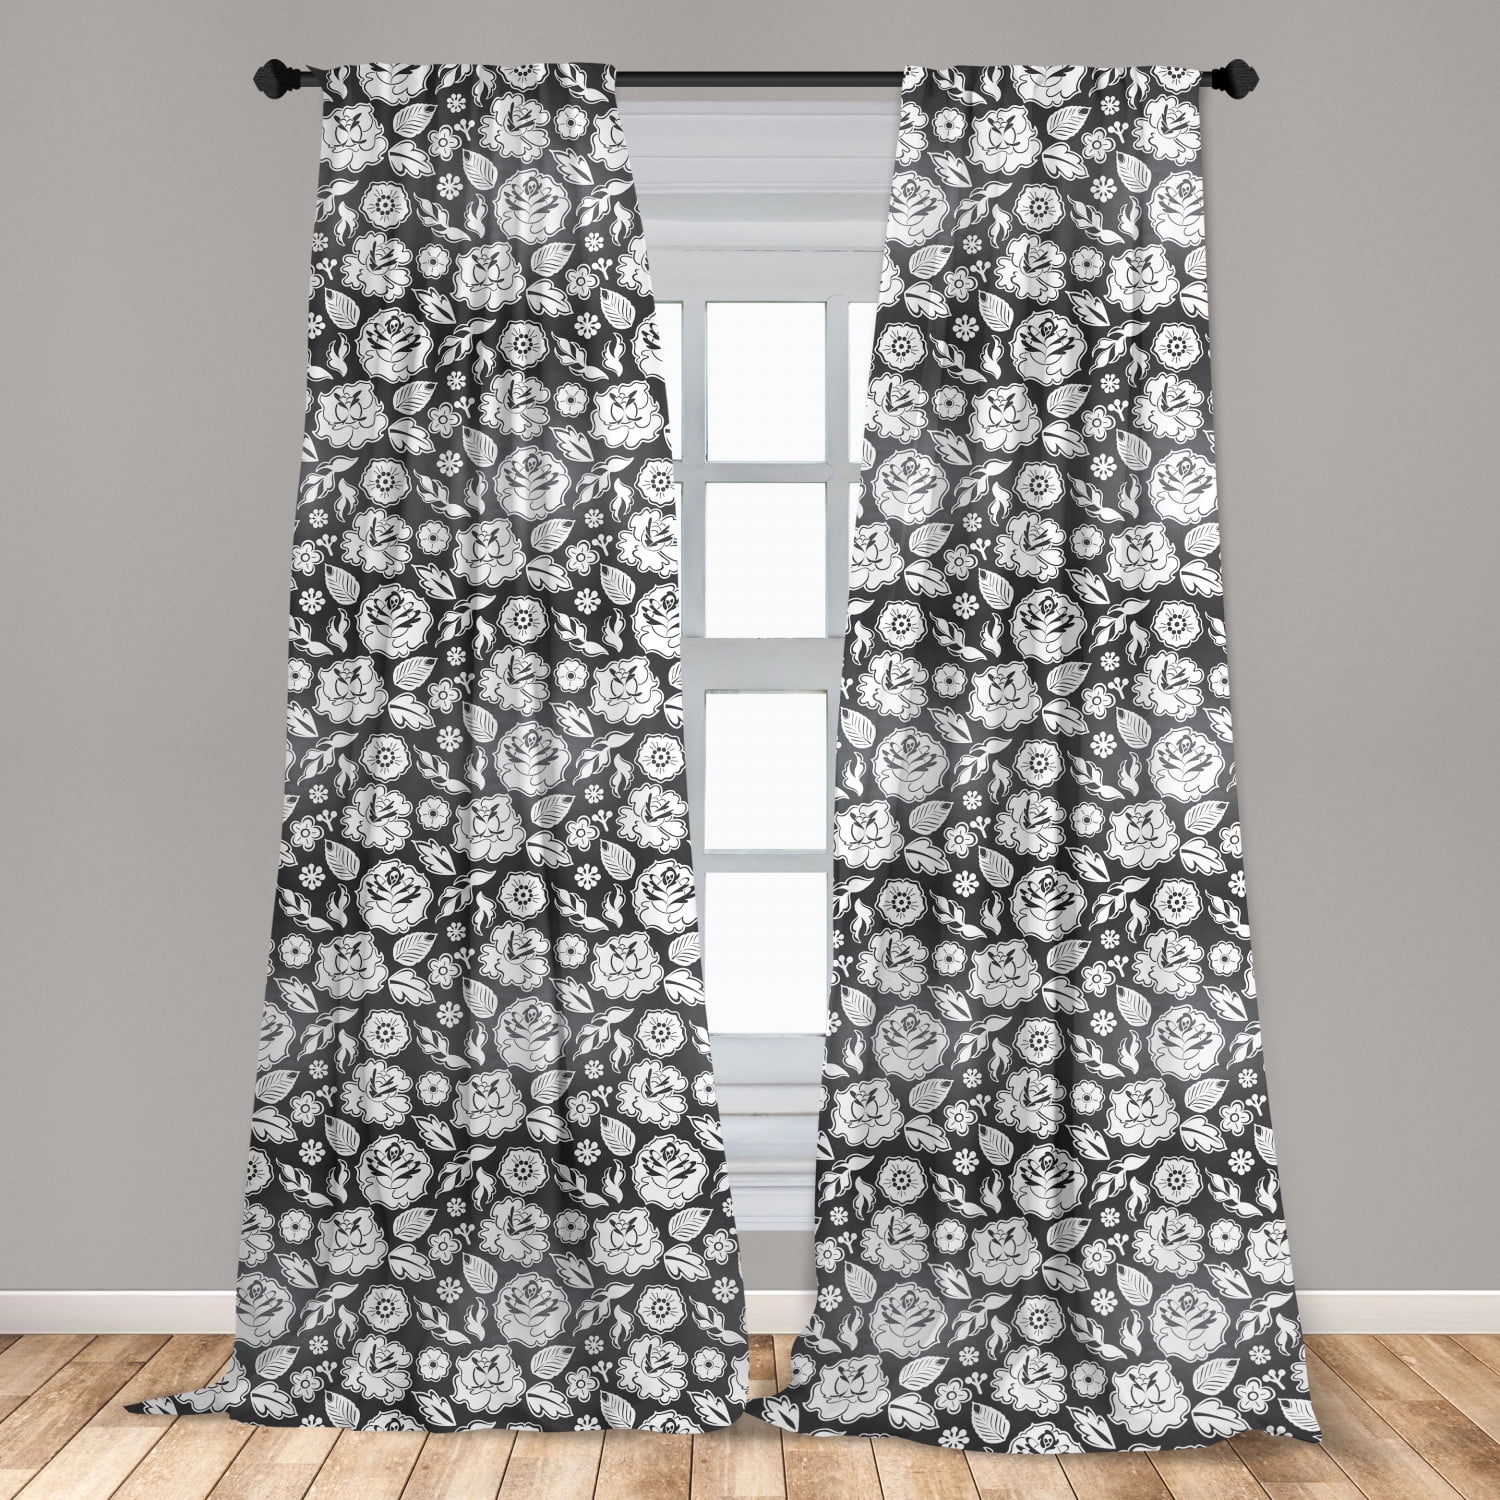 Old School Curtains 2 Panels Set, Charcoal And White Curtains